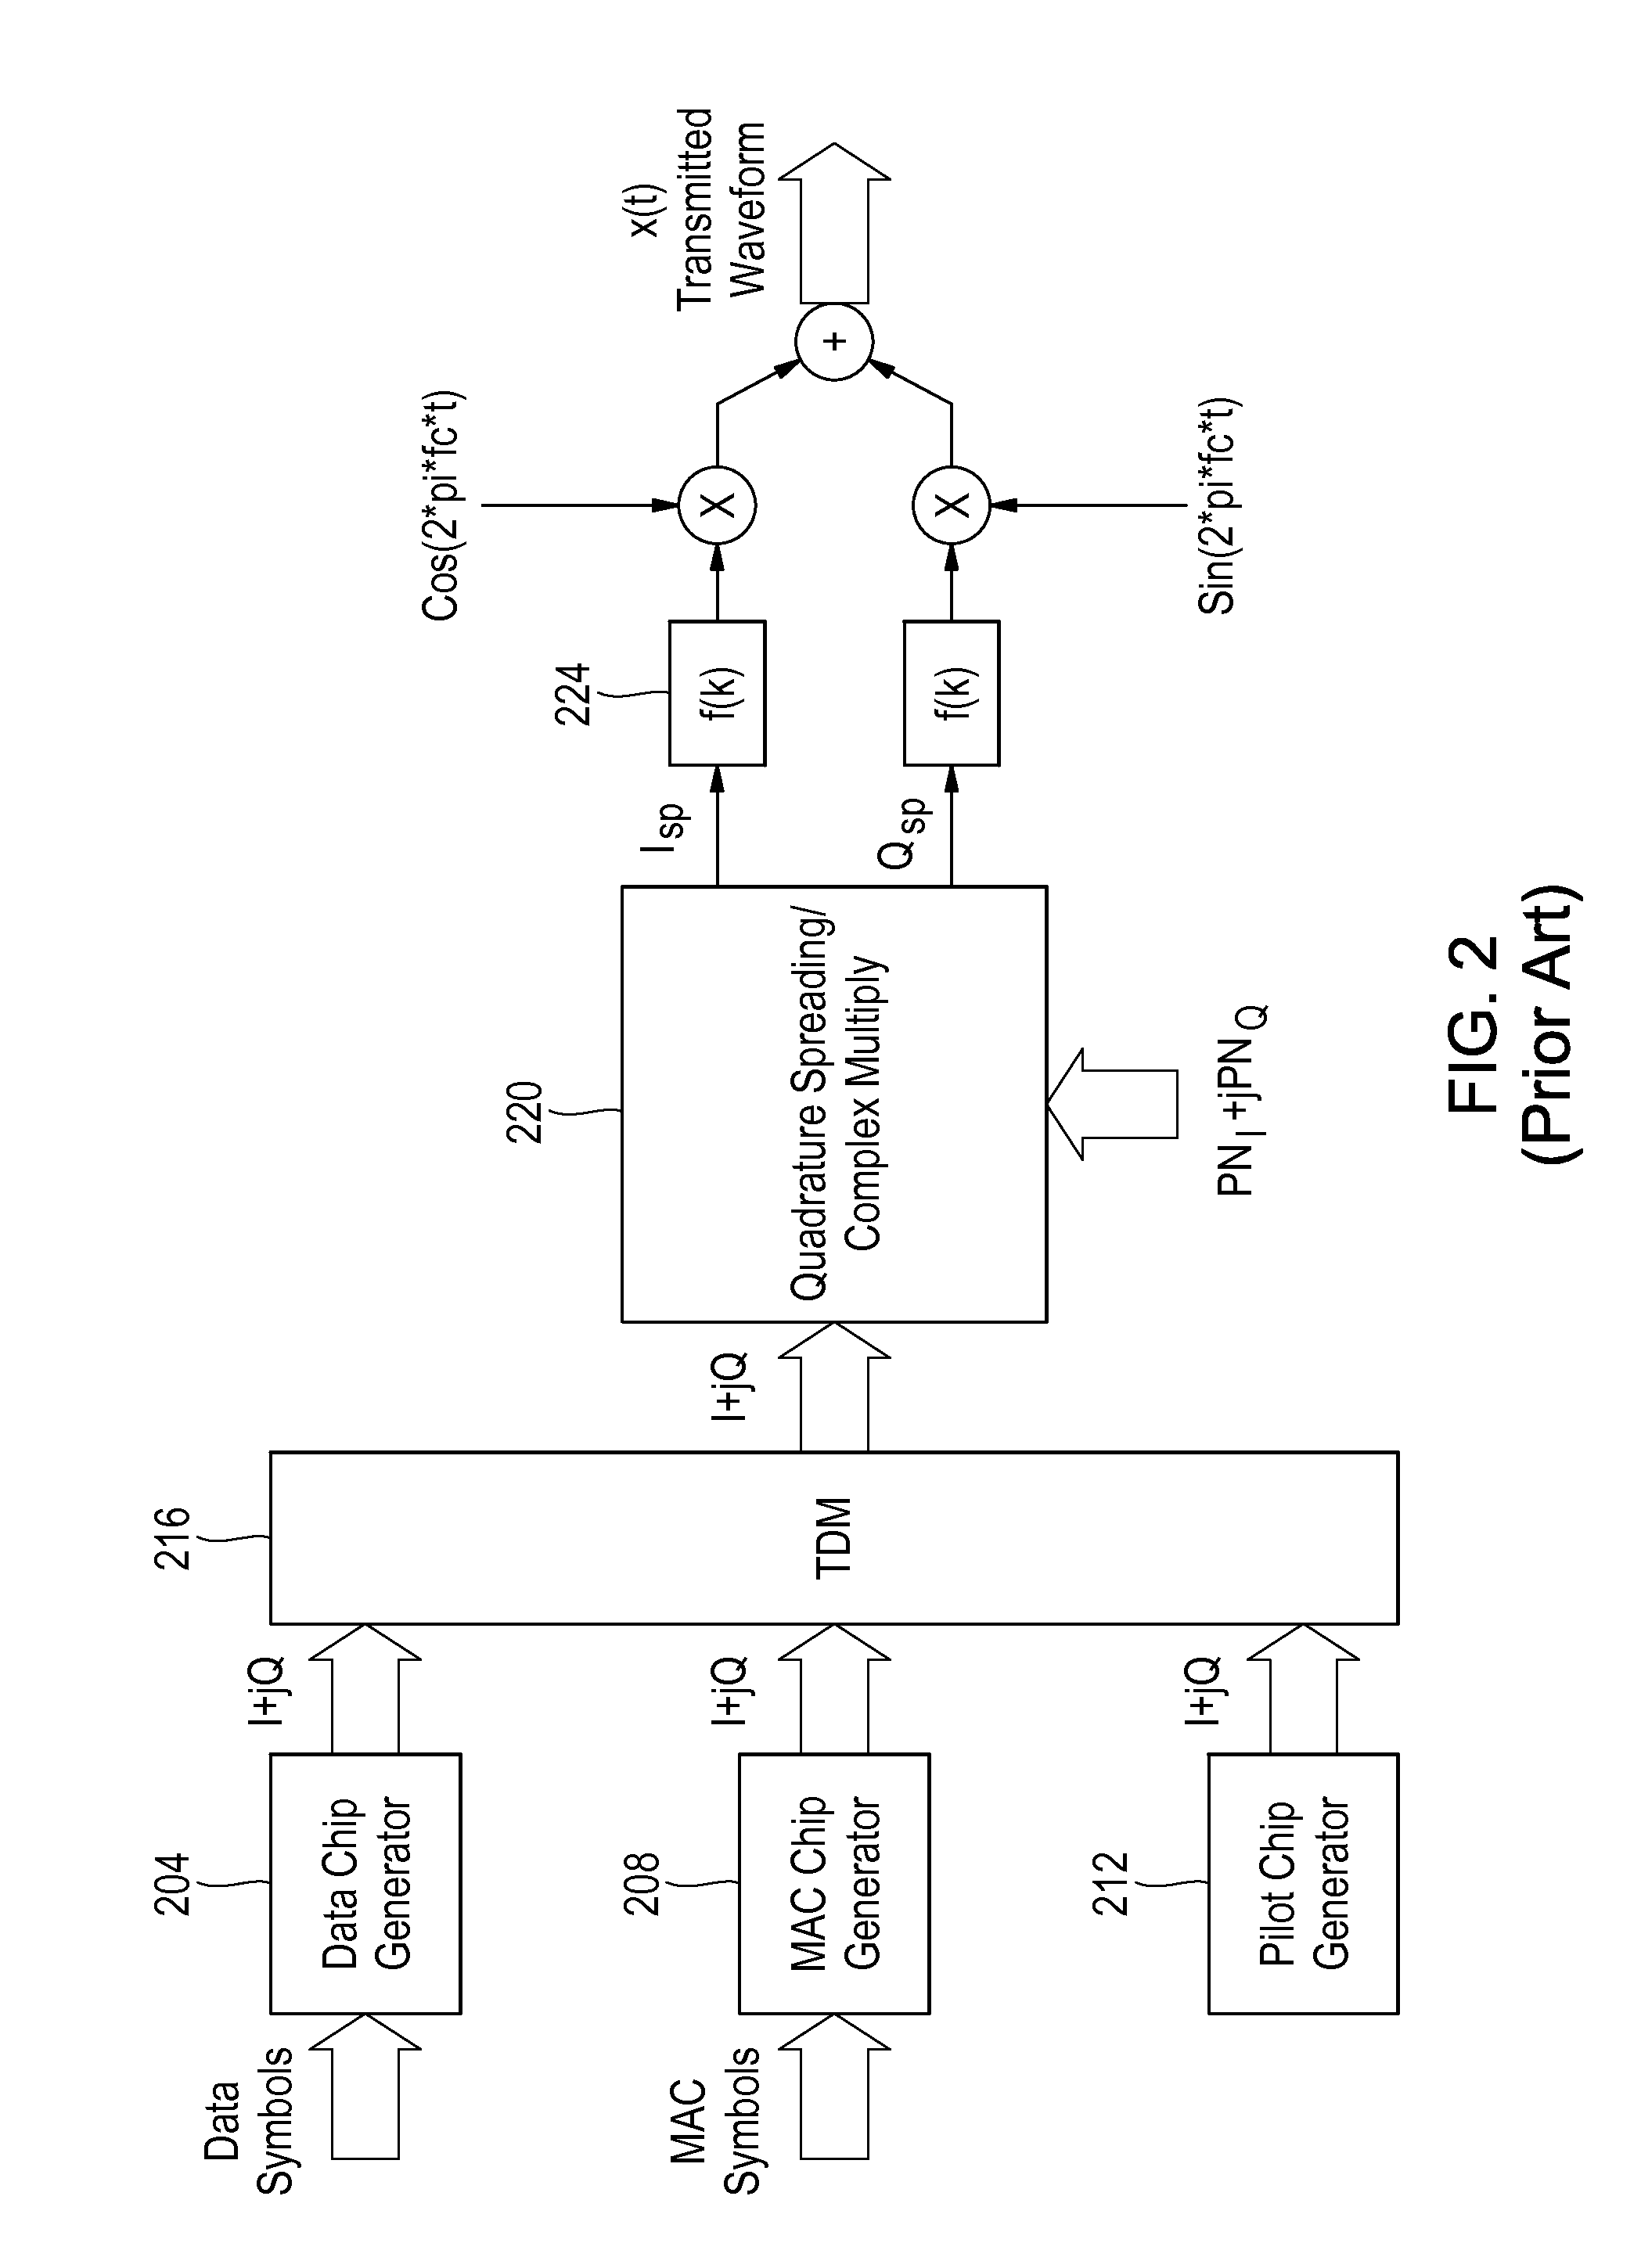 Method and Apparatus for Interference Suppression with Efficient Matrix Inversion in a DS-CDMA System